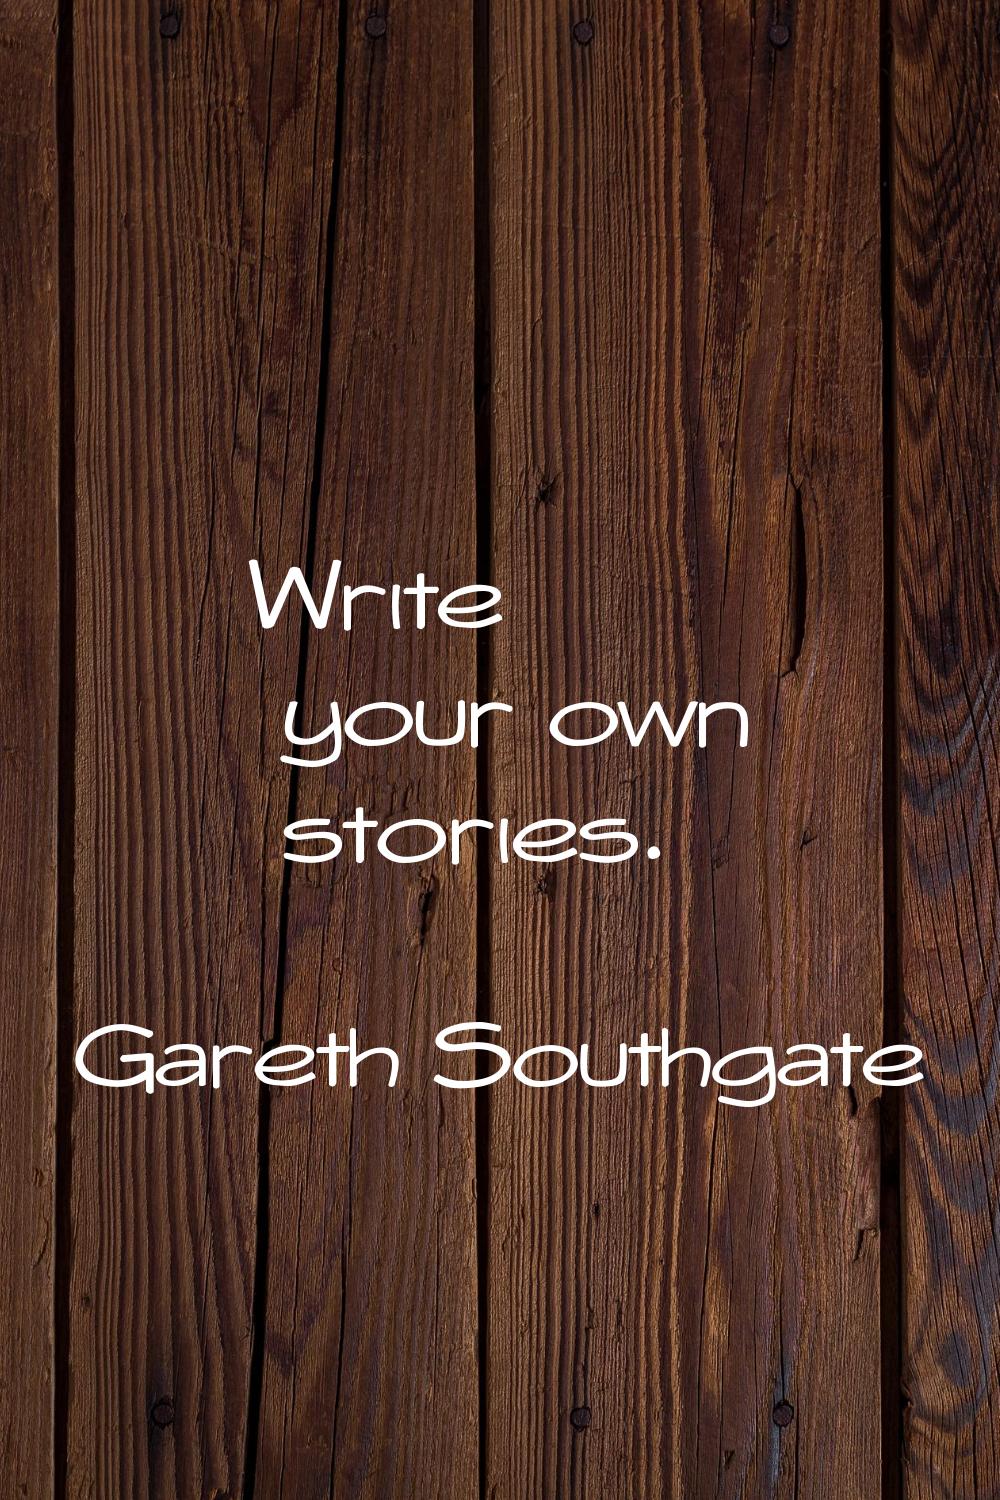 Write your own stories.